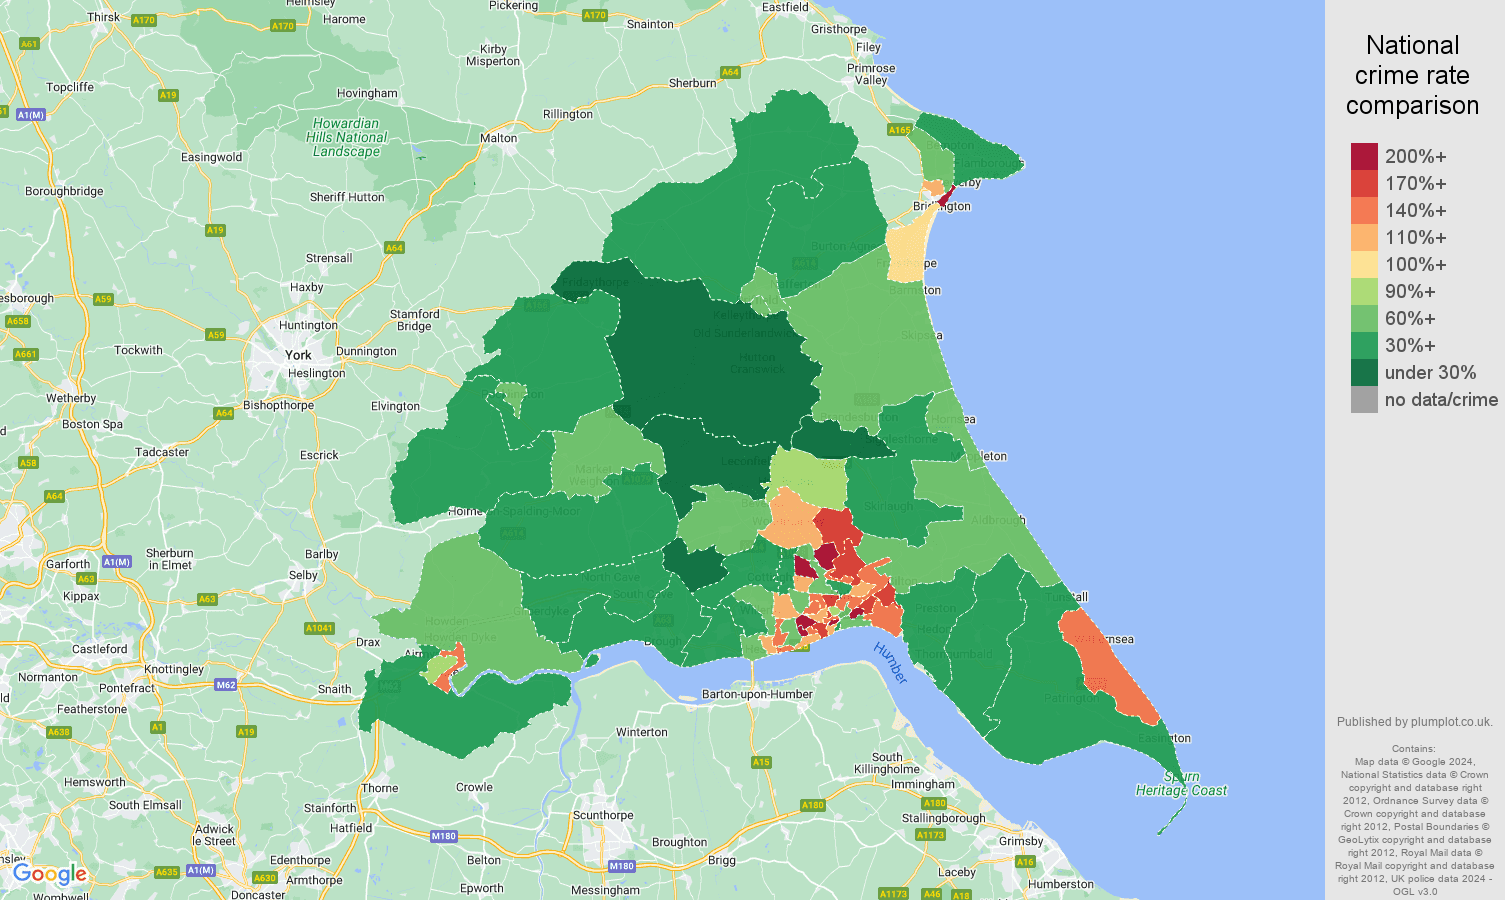 East Riding of Yorkshire crime rate comparison map